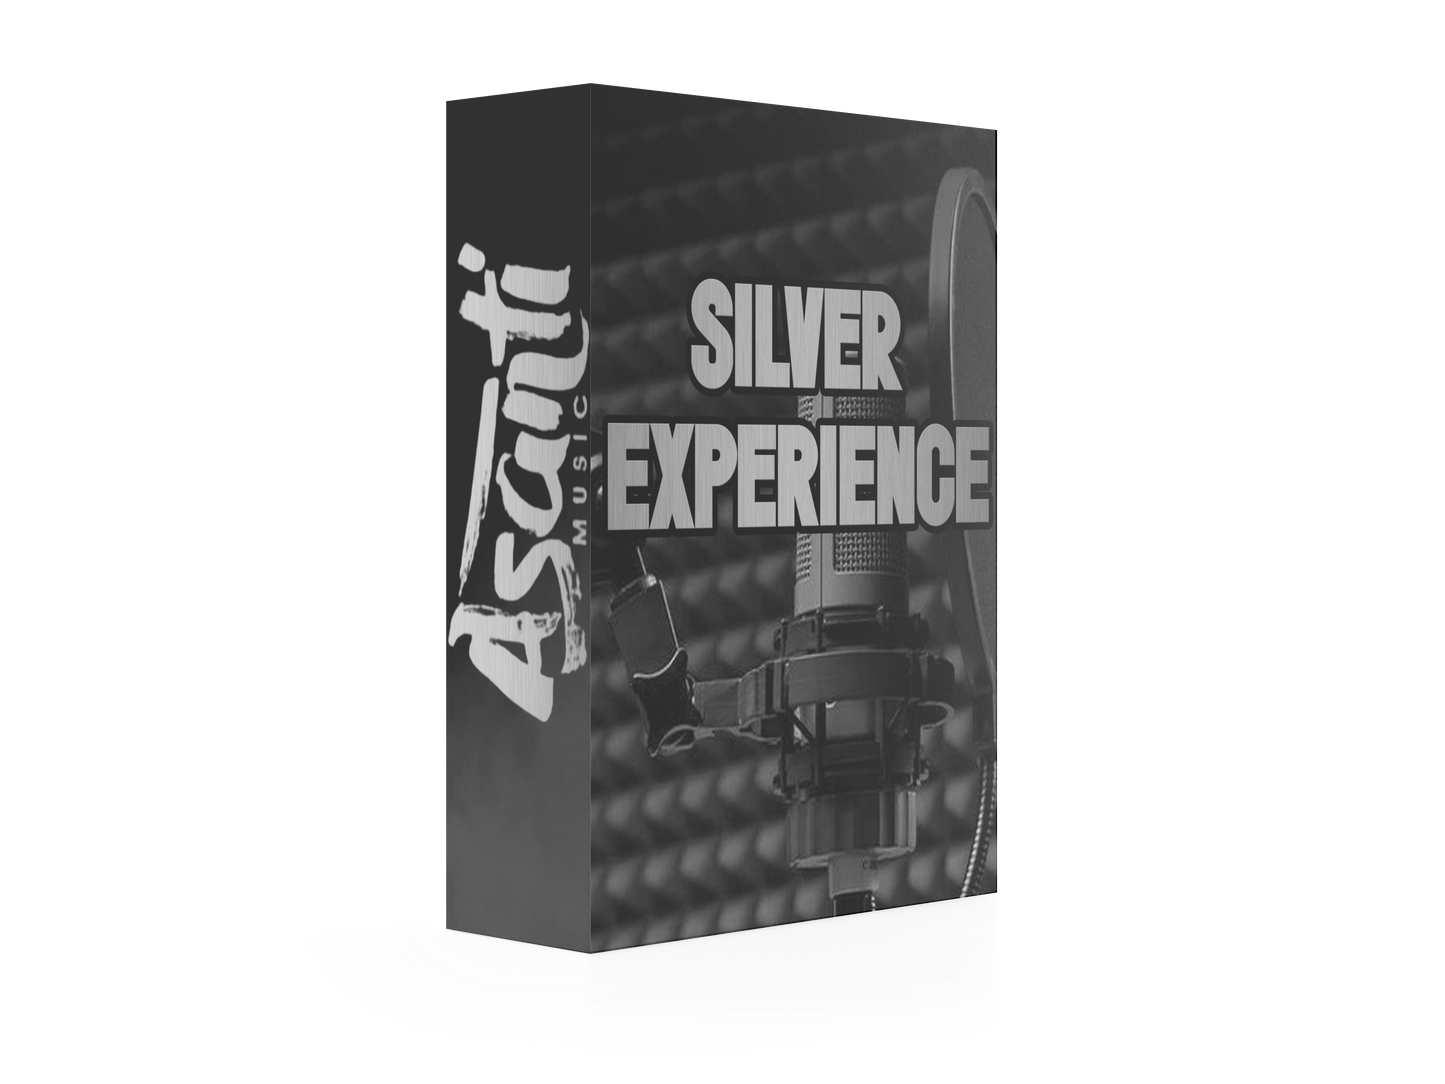 Silver experience